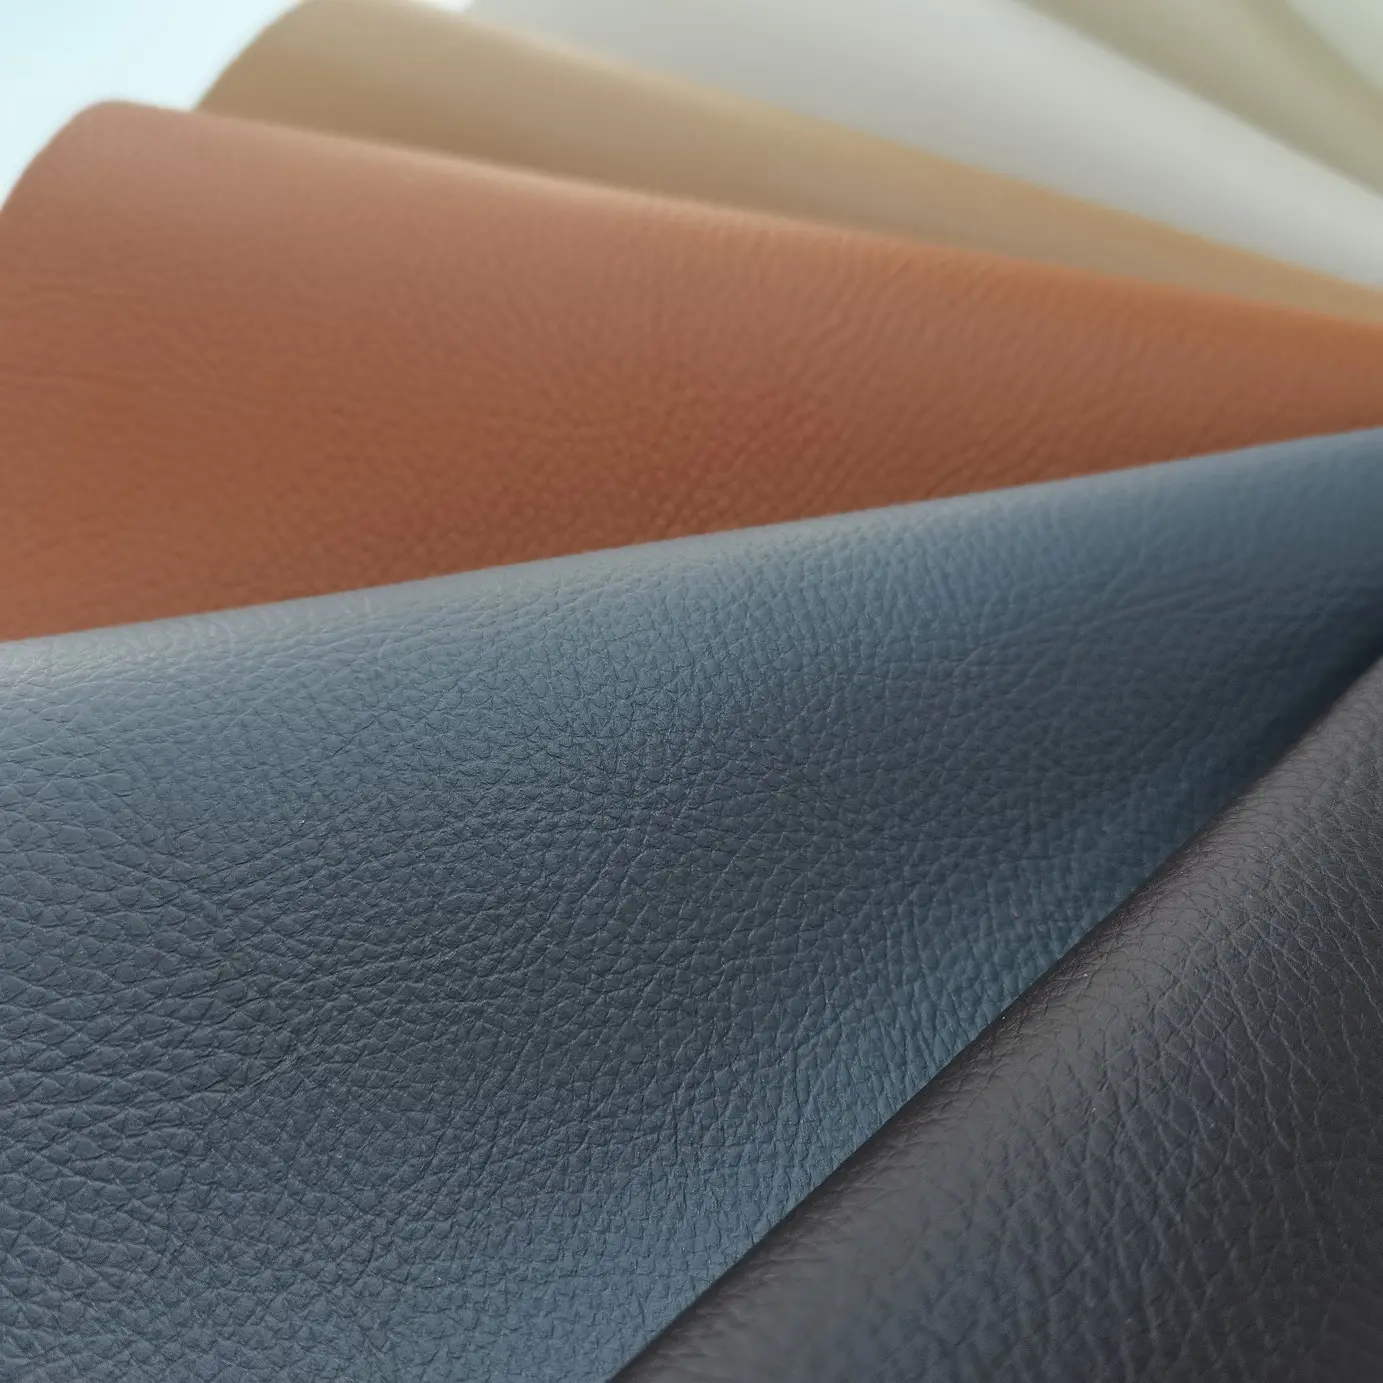 Pu Synthetic Leather High Temperature Cold Resistant Printed Vinyl Pu Faux Leather Material For Making Shoe/bag/notebooks Case